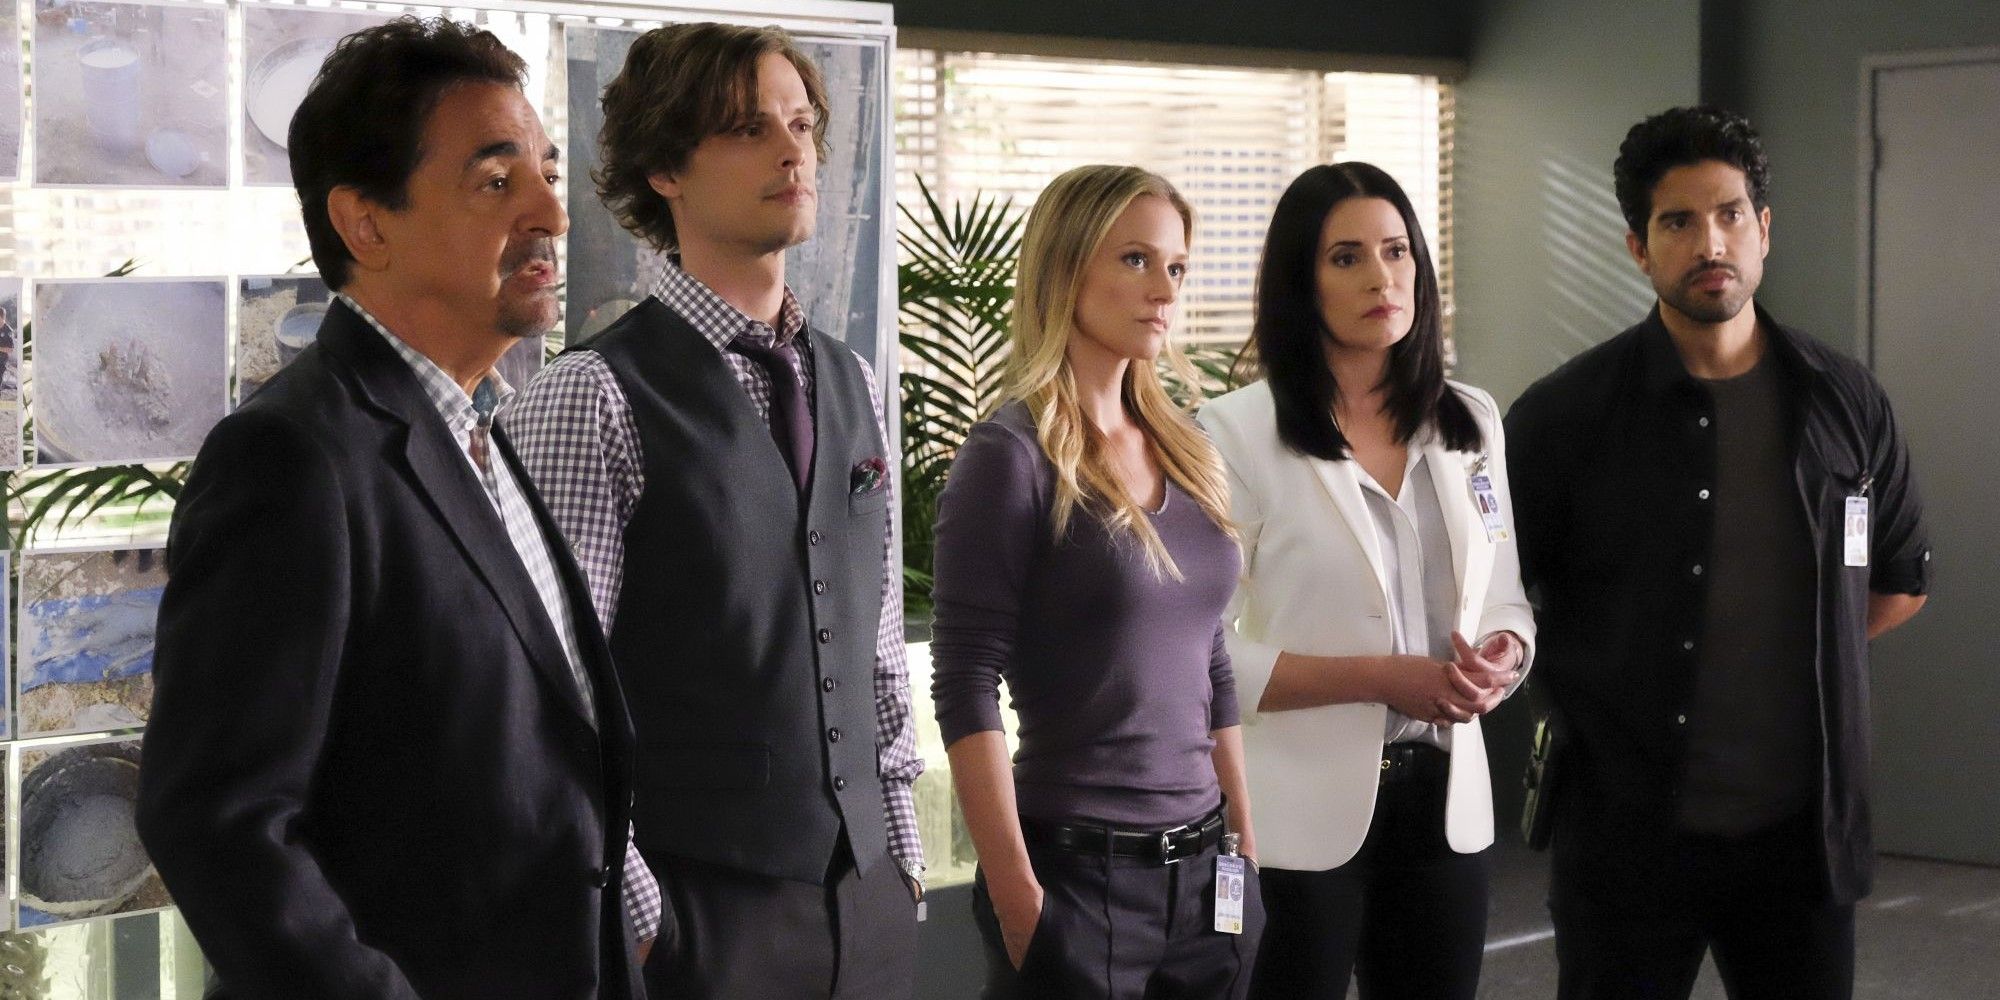 Scene of the cast from Criminal Minds